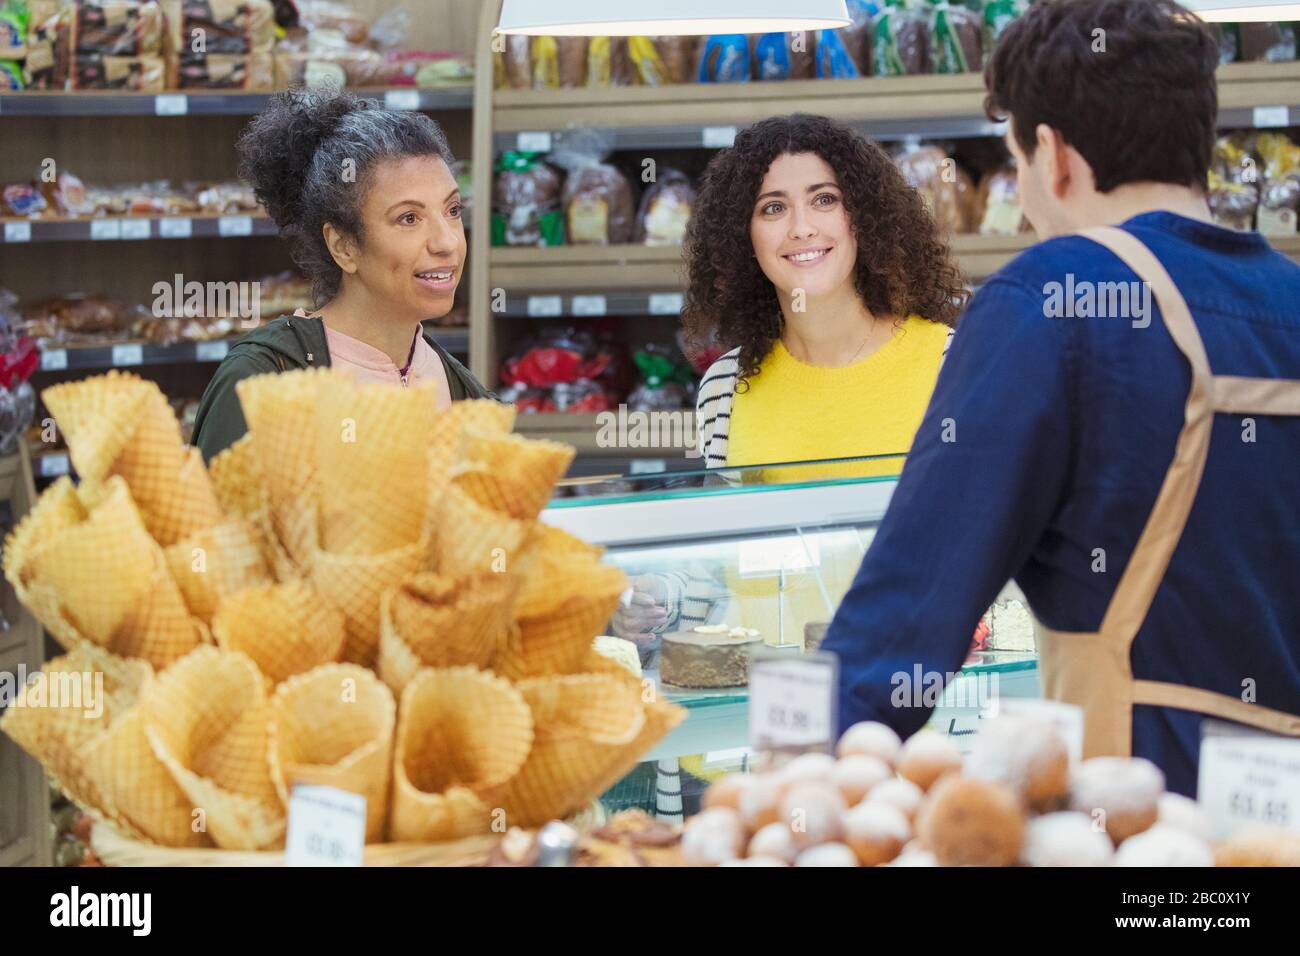 Women talking with worker at bakery display case in supermarket Stock Photo